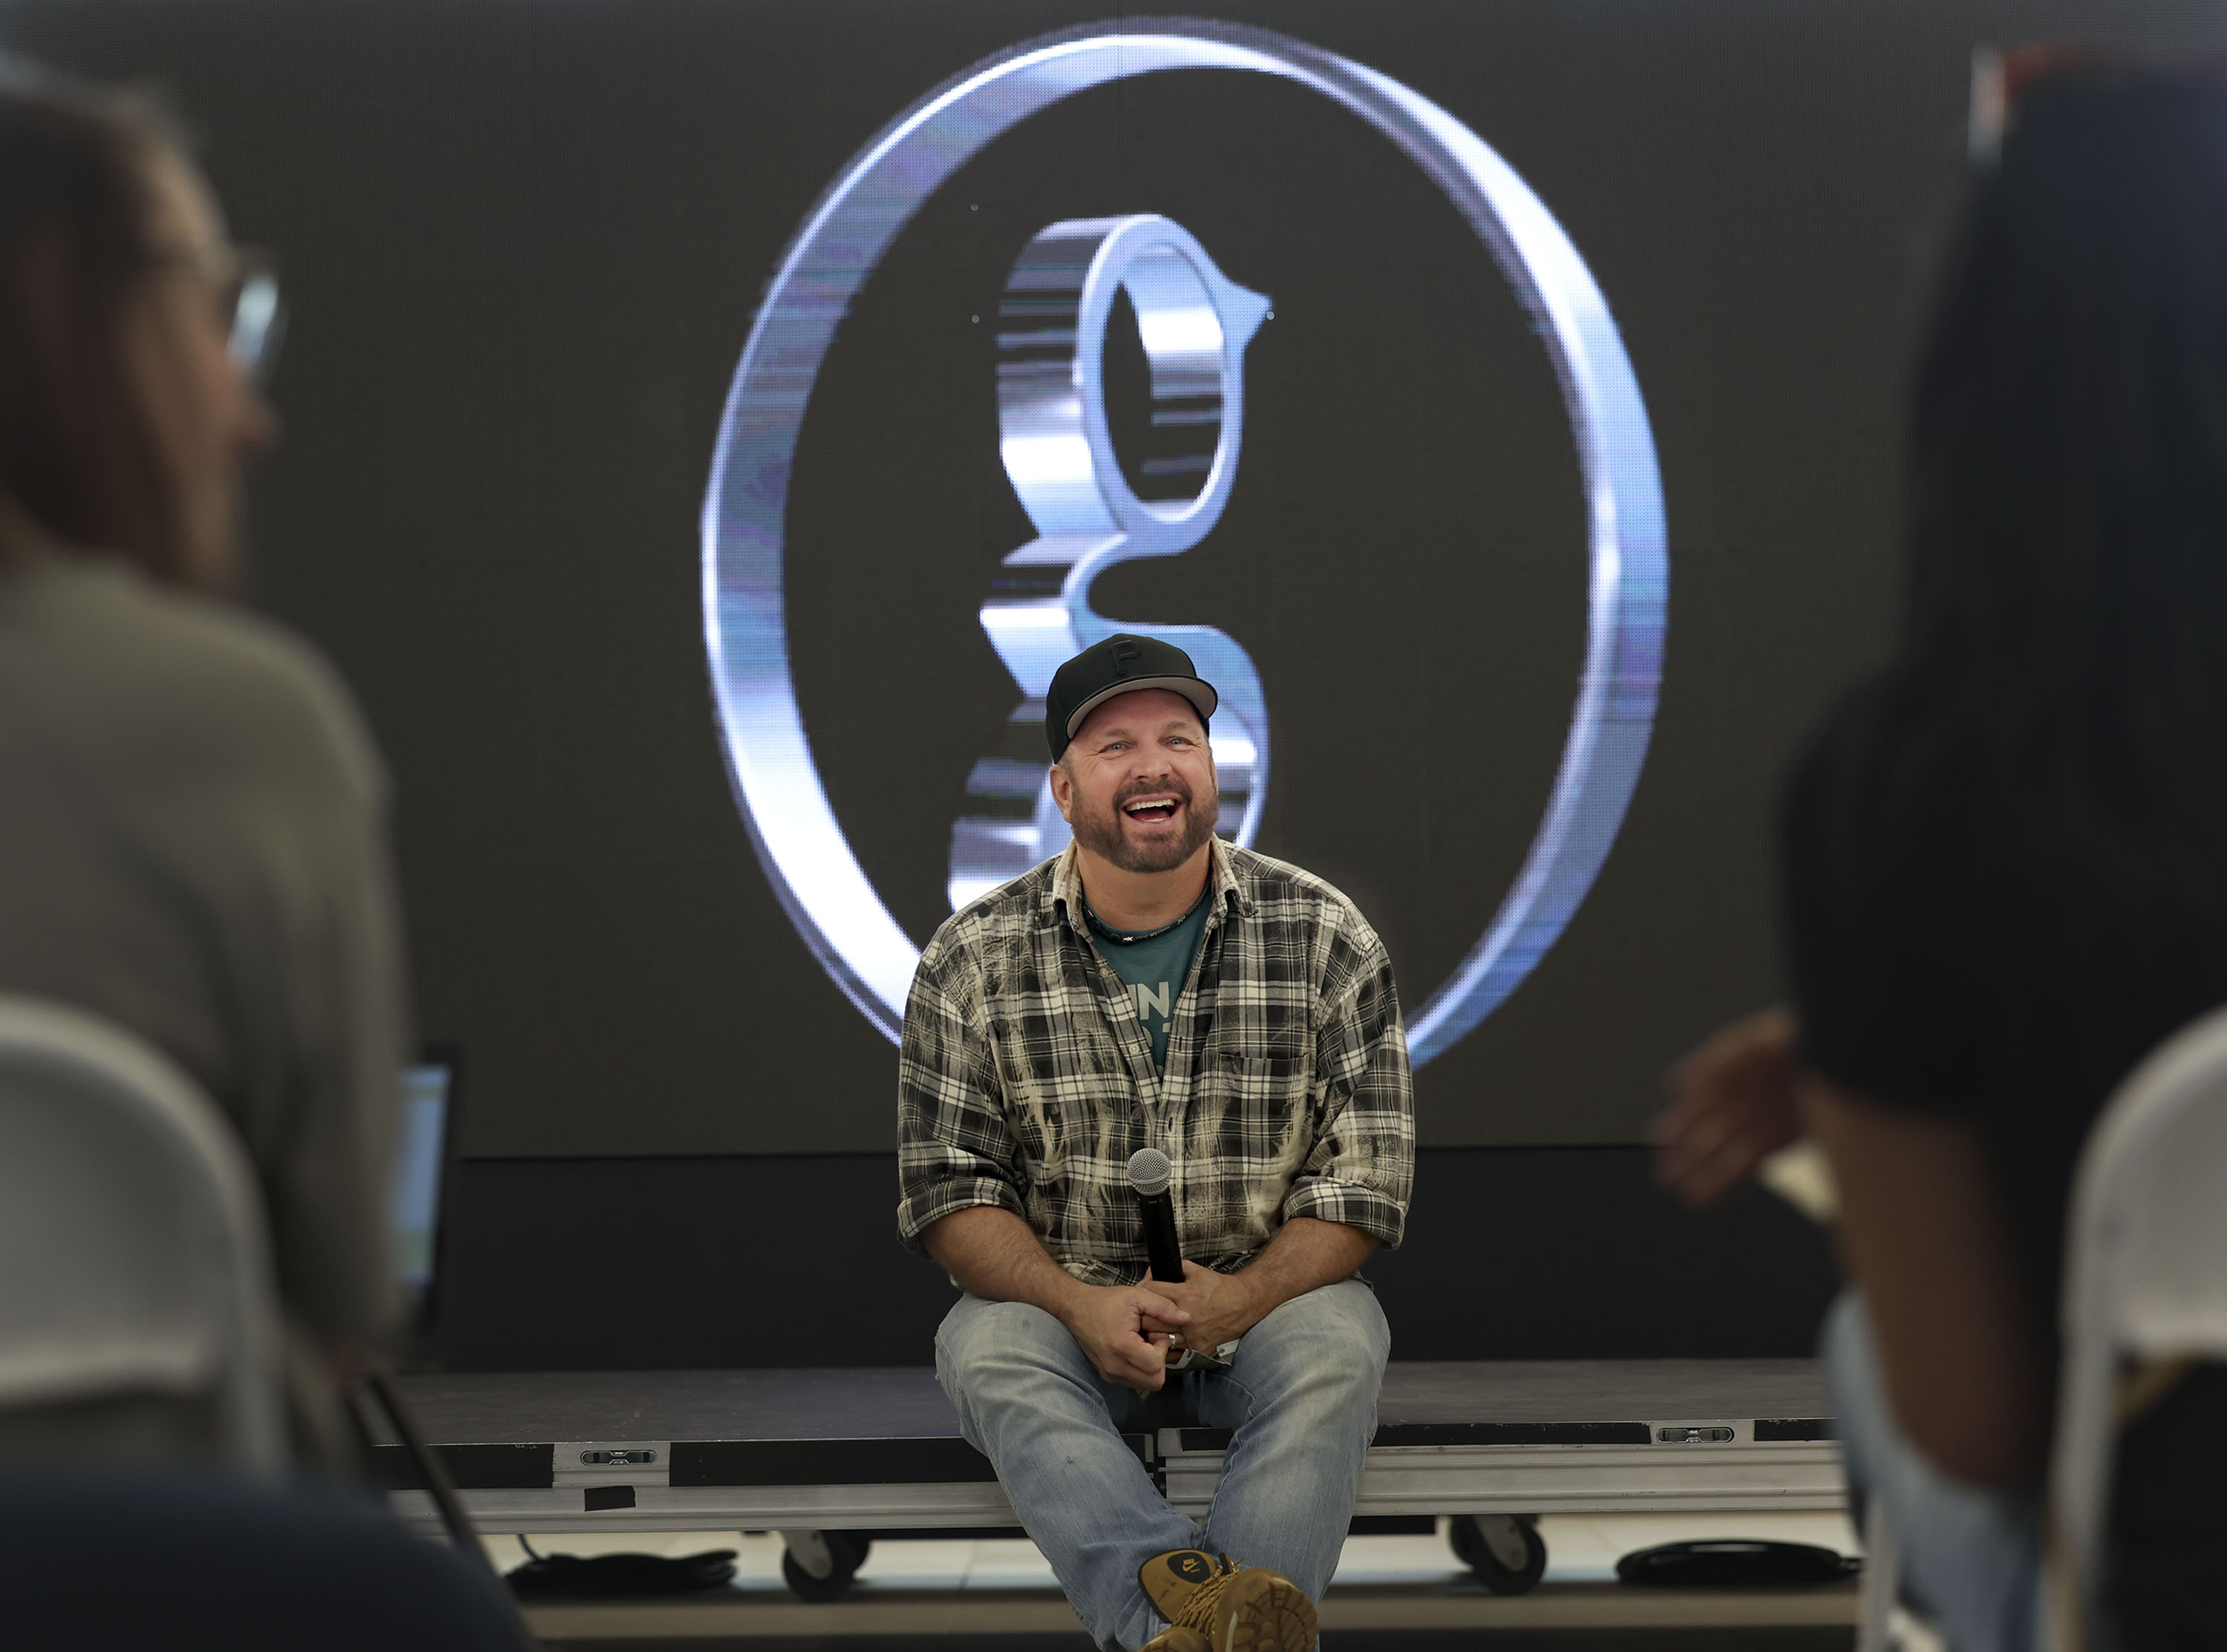 Garth Brooks 'Time Traveler' album: What songs are on it? How to